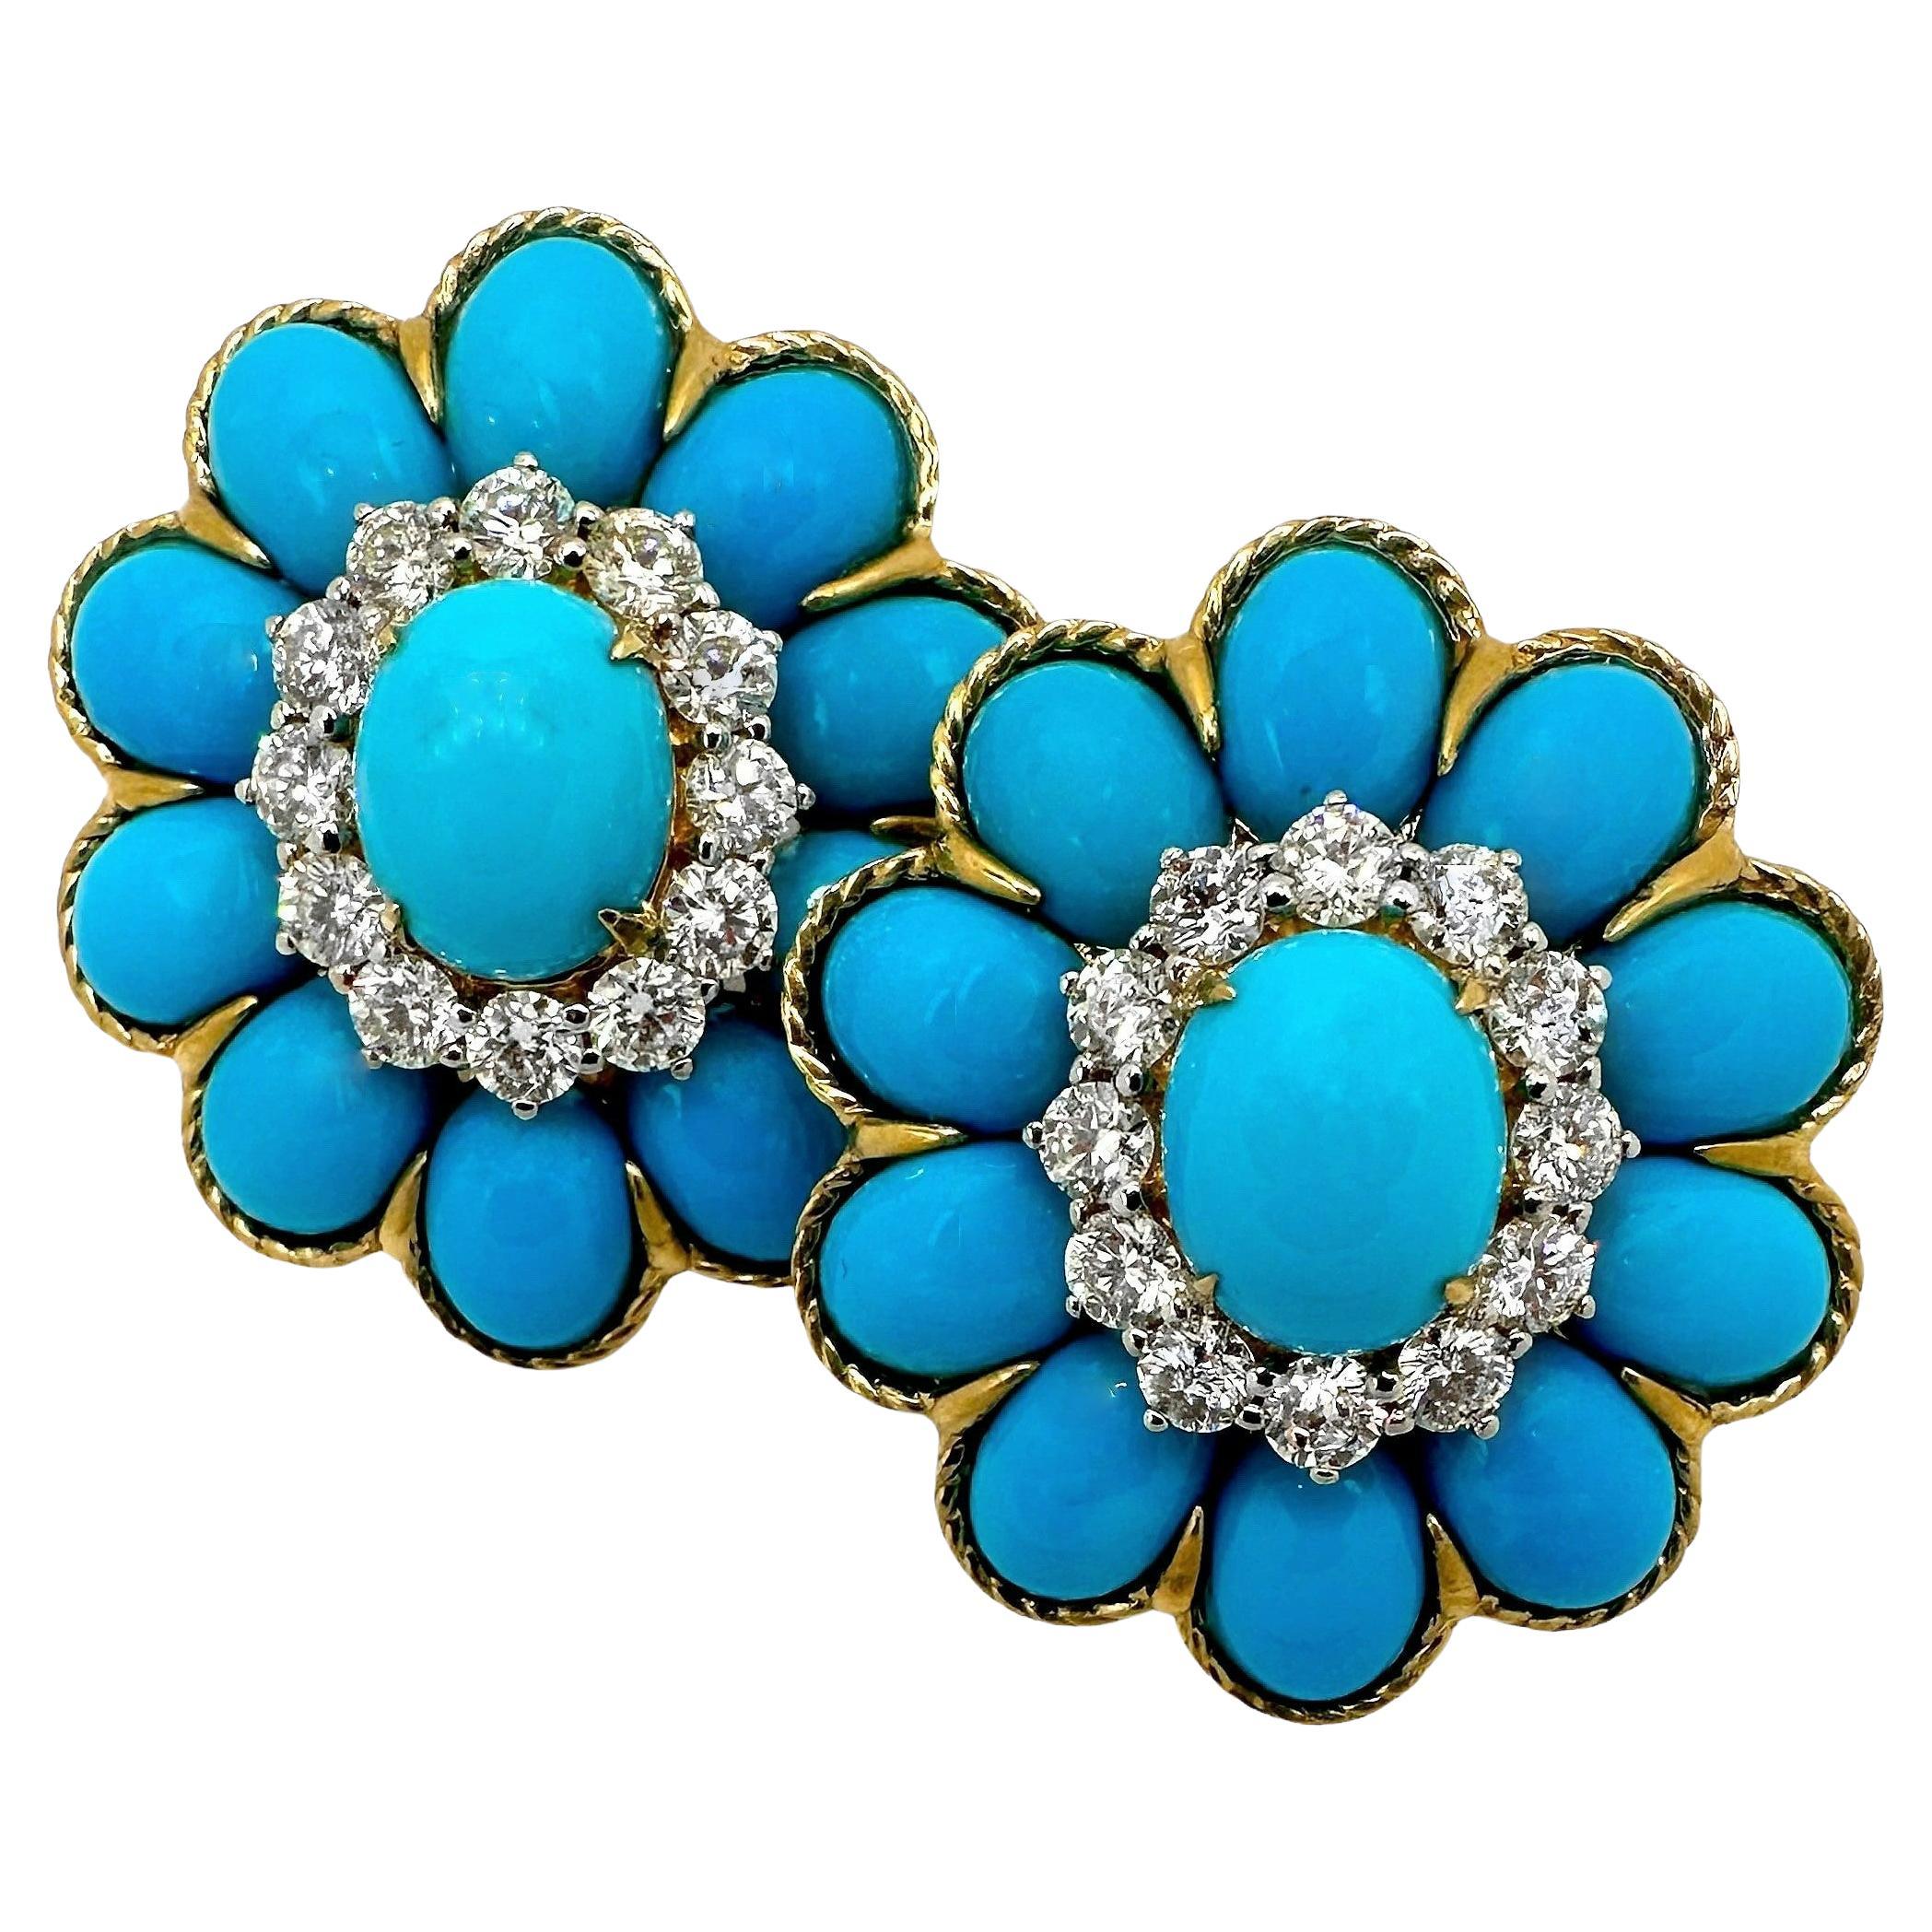 Striking 18K Yellow Gold Vintage Turquoise and Diamond Earrings